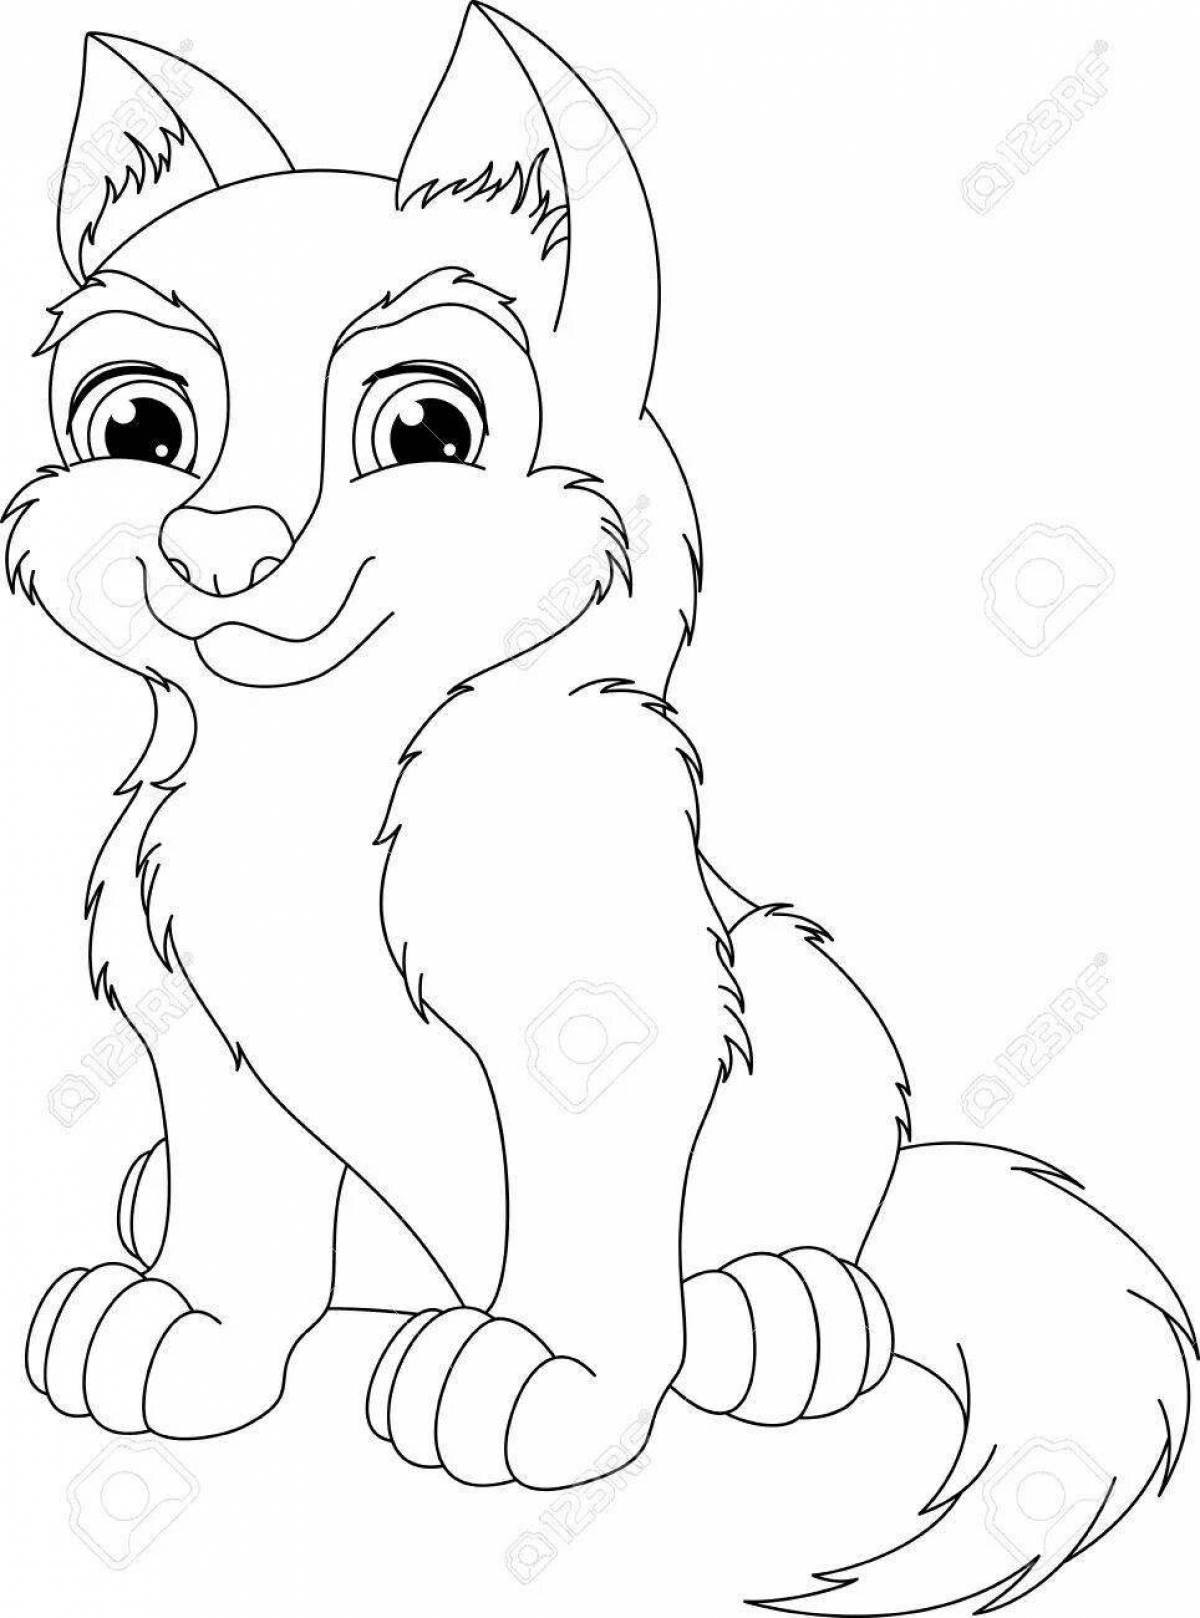 Coloring page adorable wolf cub